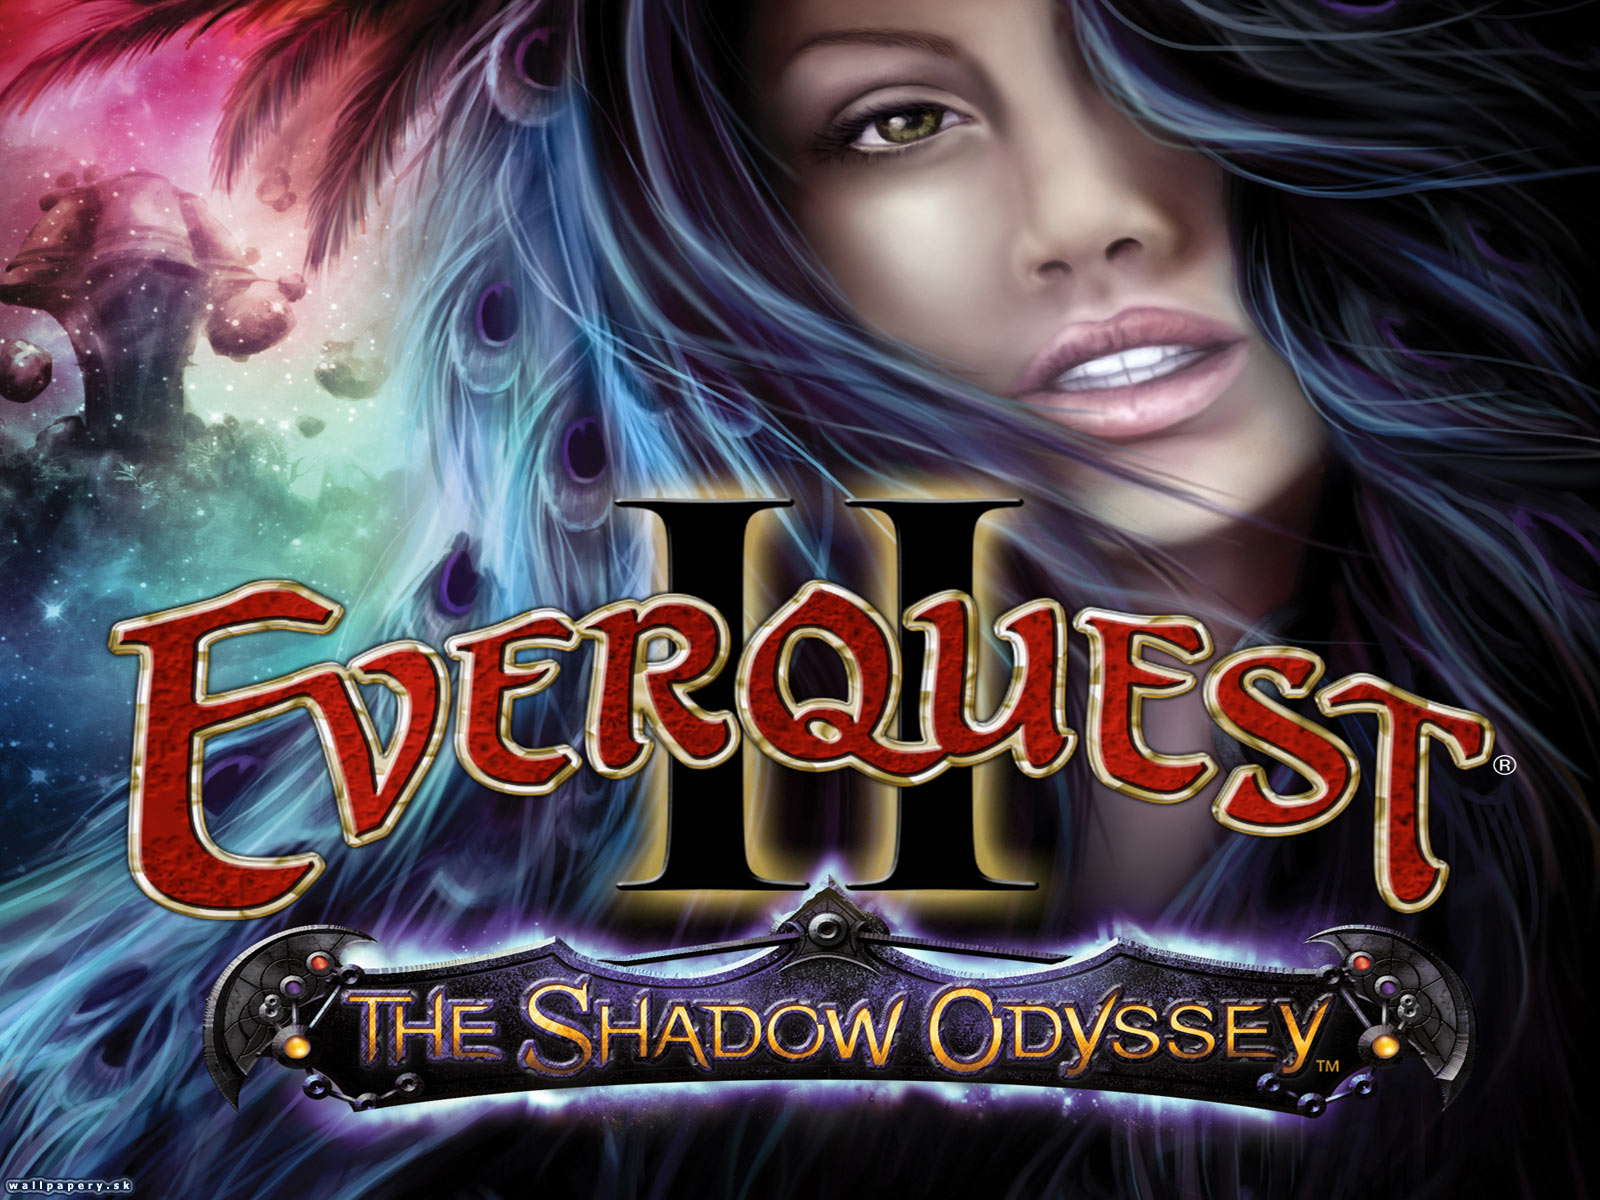 EverQuest 2: The Shadow Odyssey - wallpaper 1